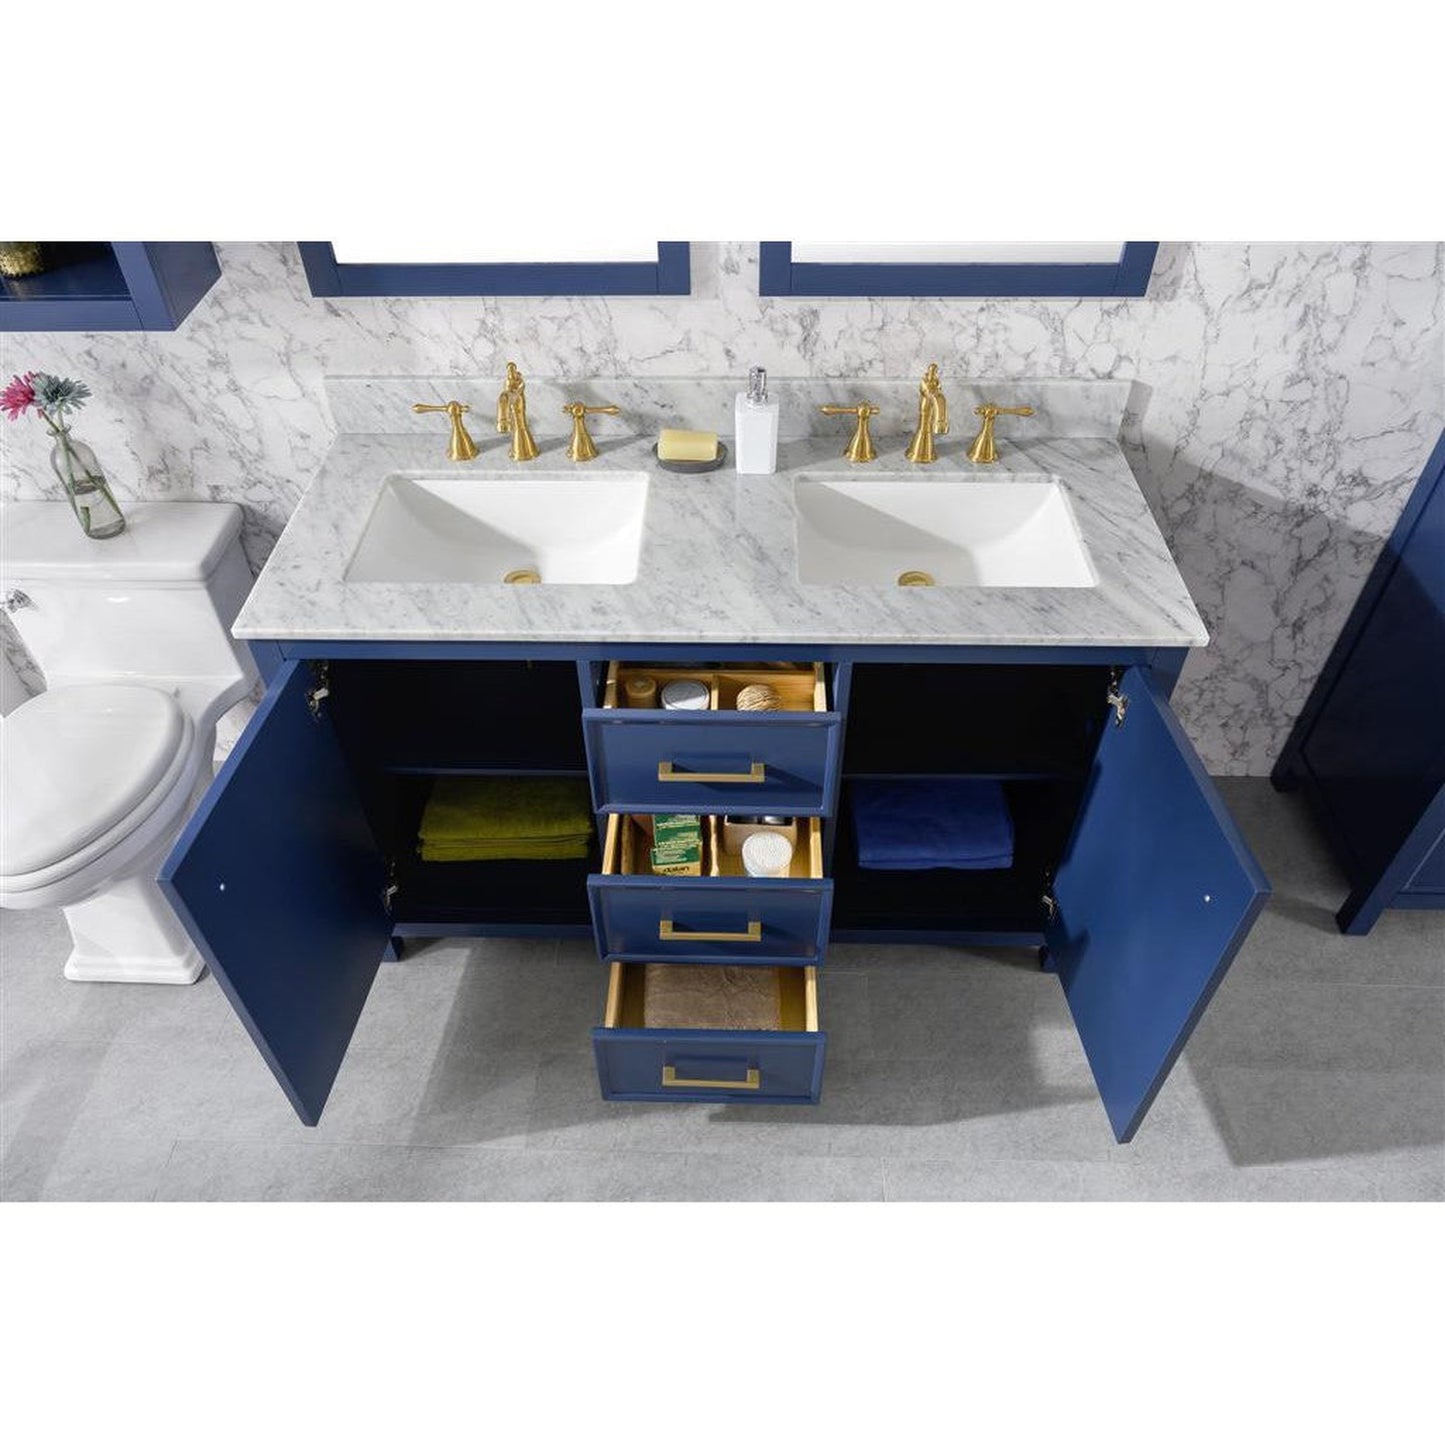 Legion Furniture WLF2154 54" Blue Freestanding Vanity With White Carrara Marble Top and Double White Ceramic Sink